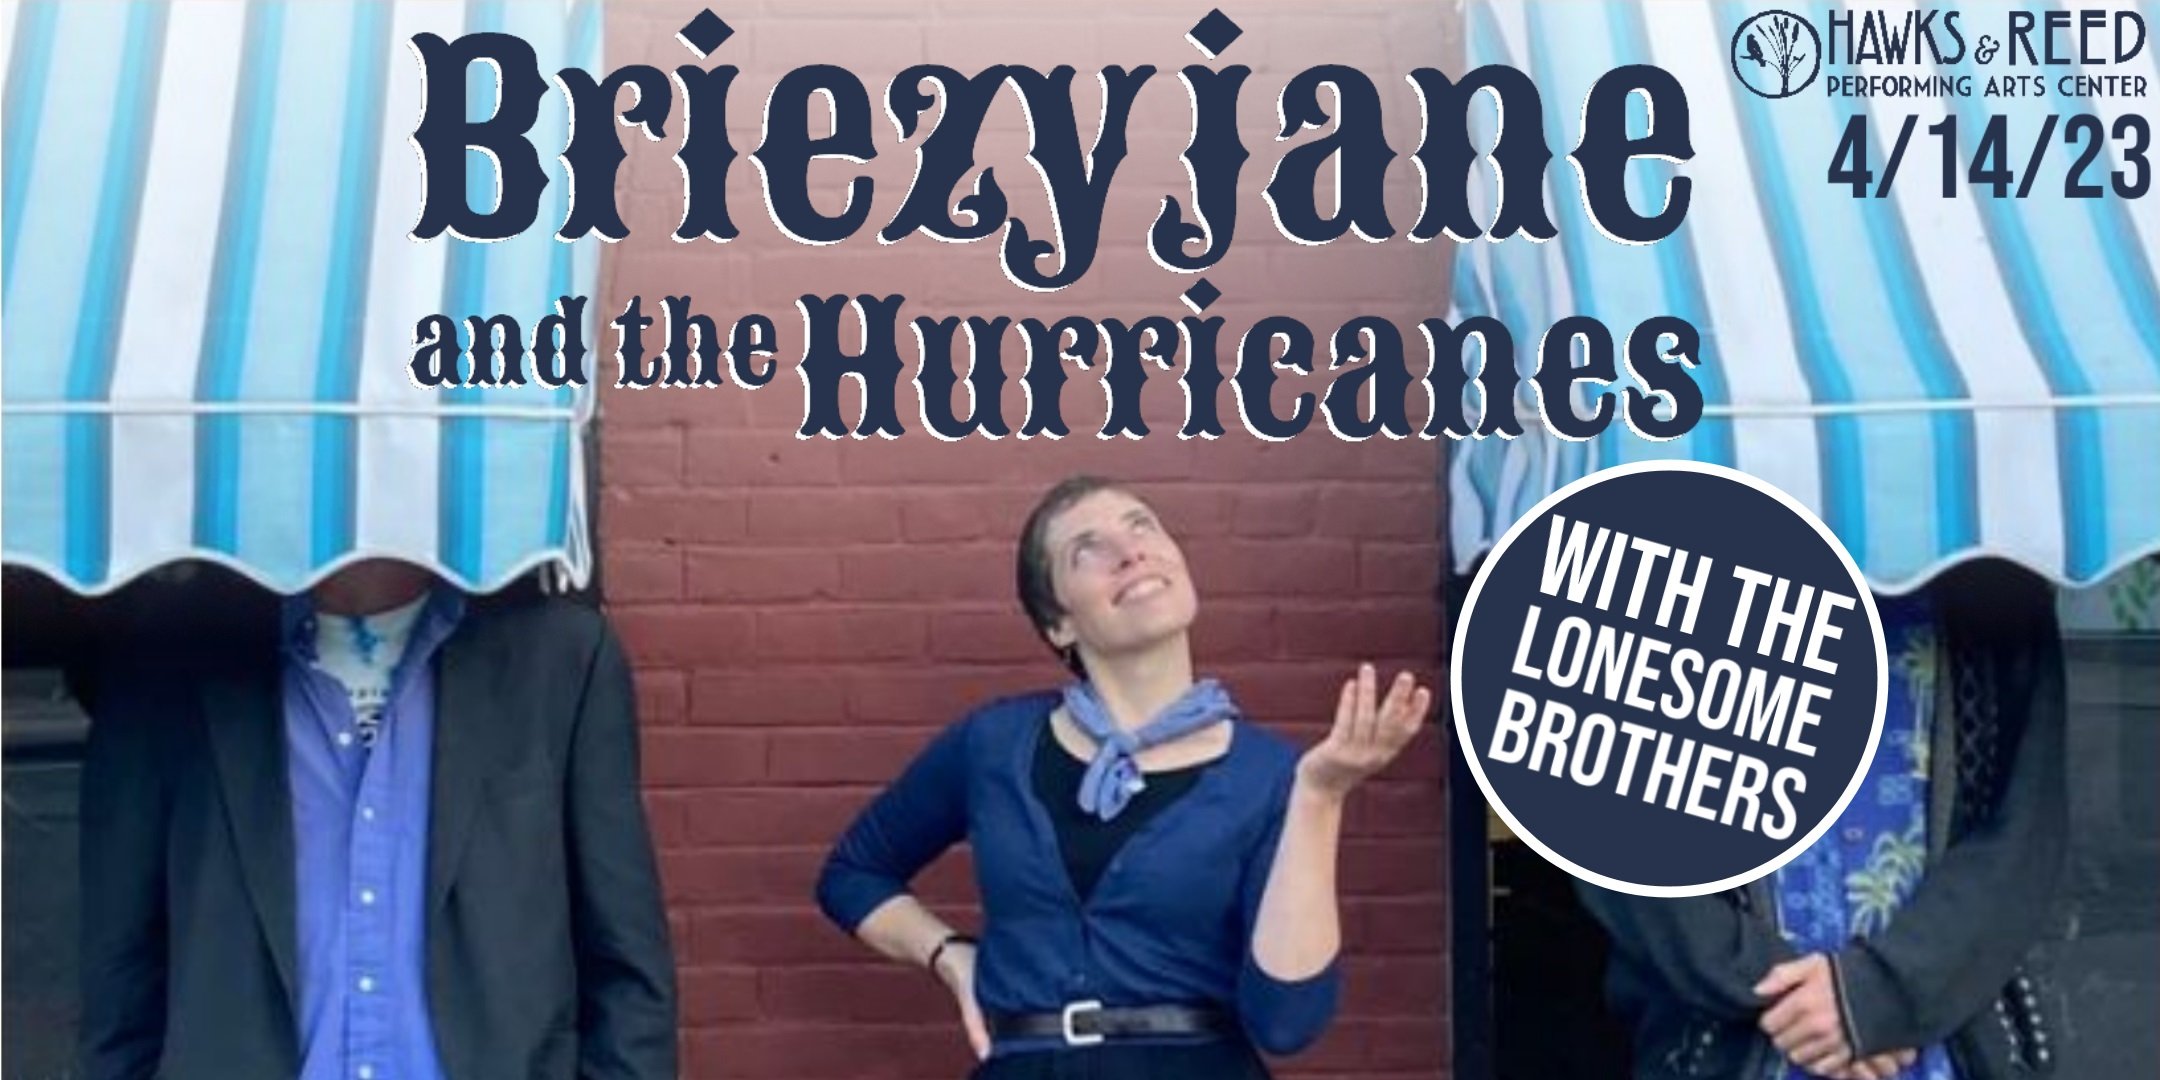 Briezyjane and the Hurricanes with Lonesome Brothers